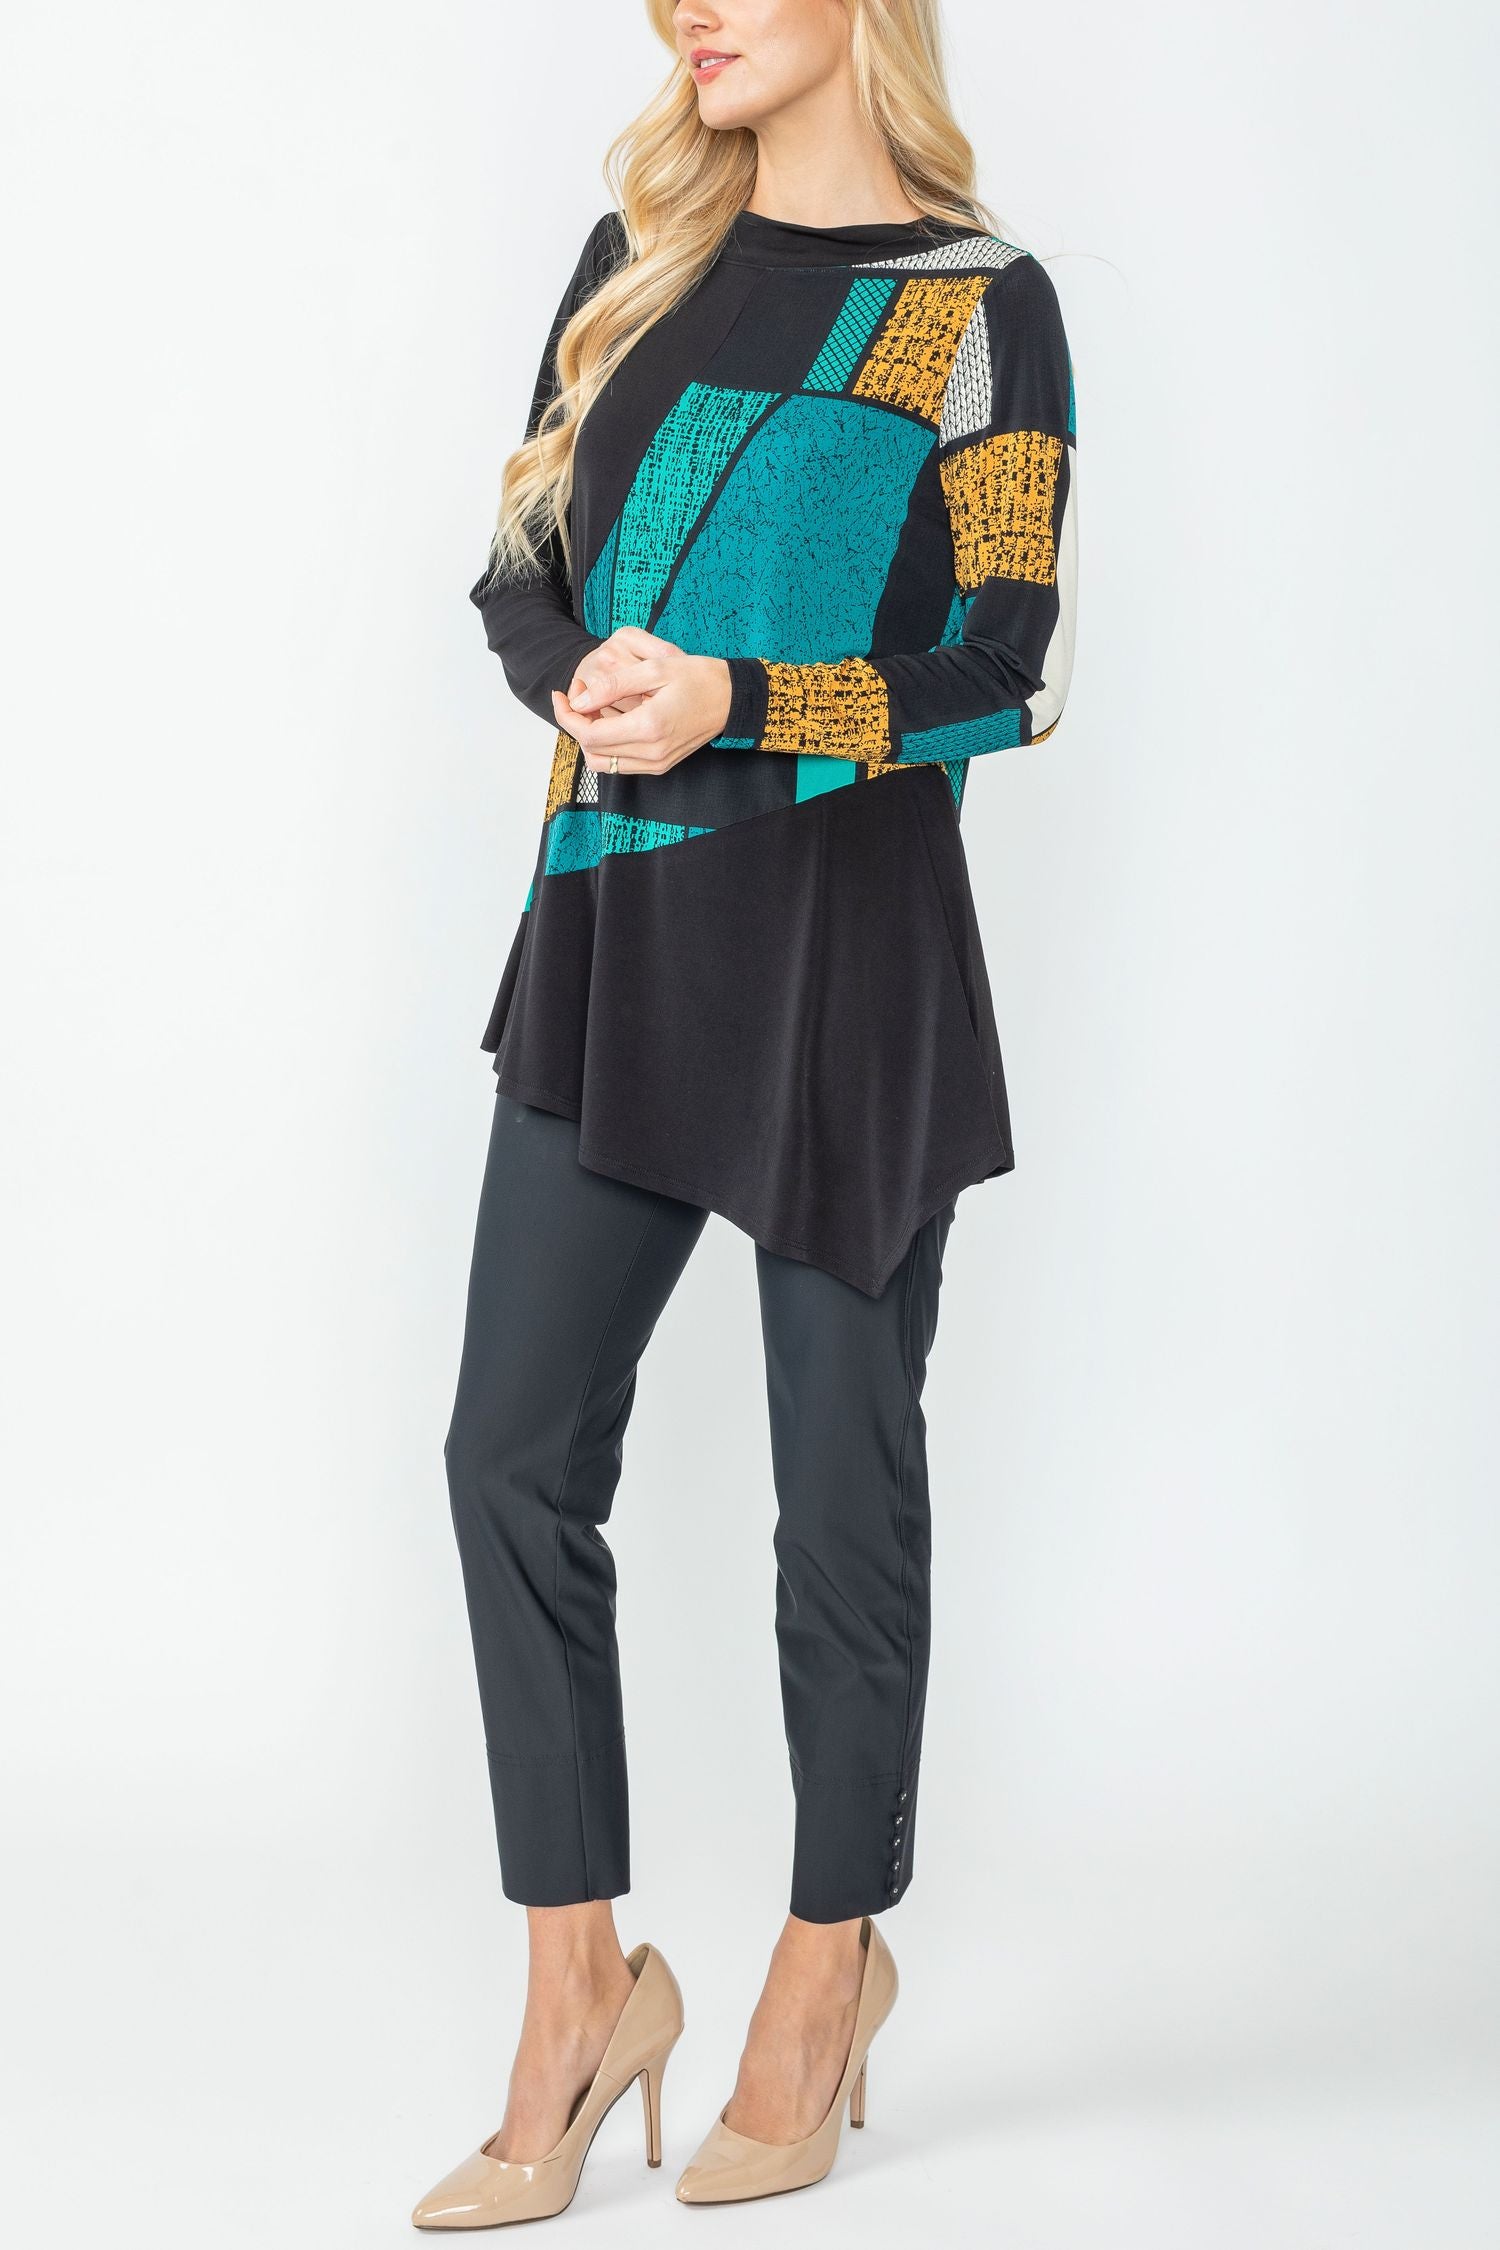 Green Mixed Square Tunic Top